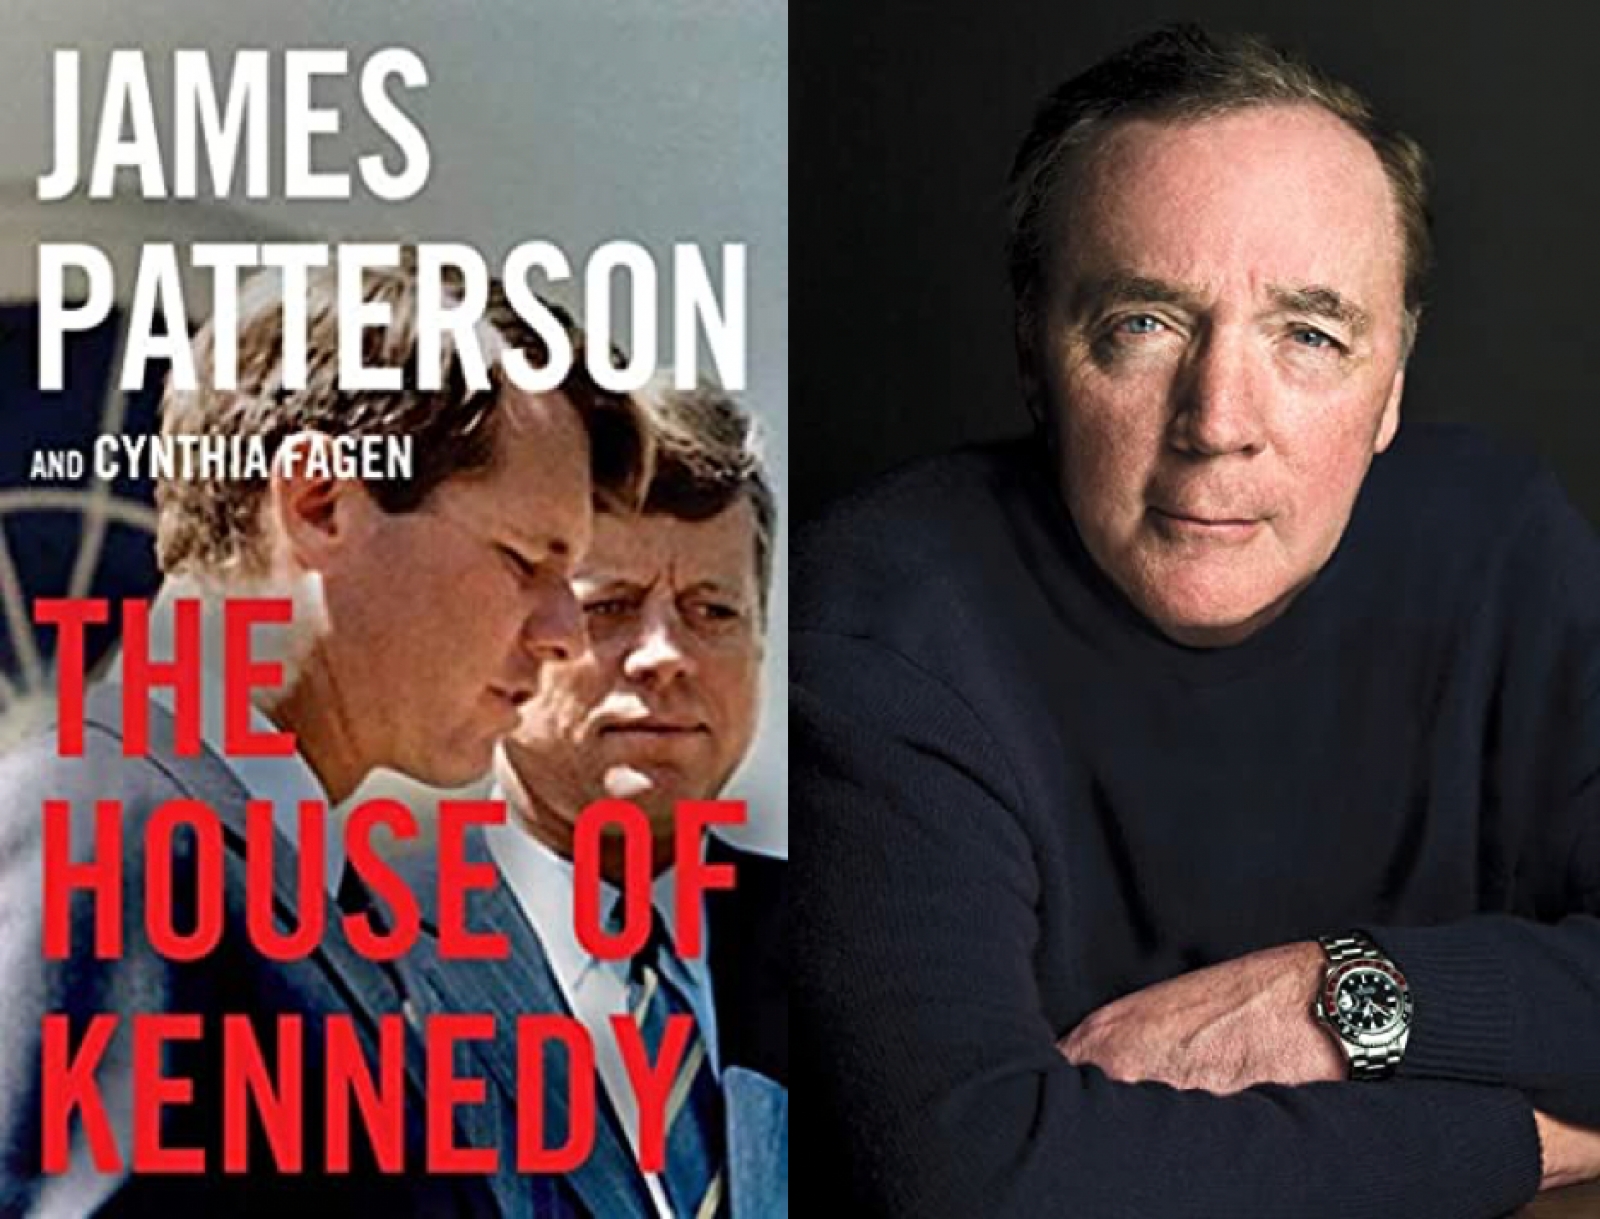 The House of Kennedy, by James Patterson and Cynthia Fagen